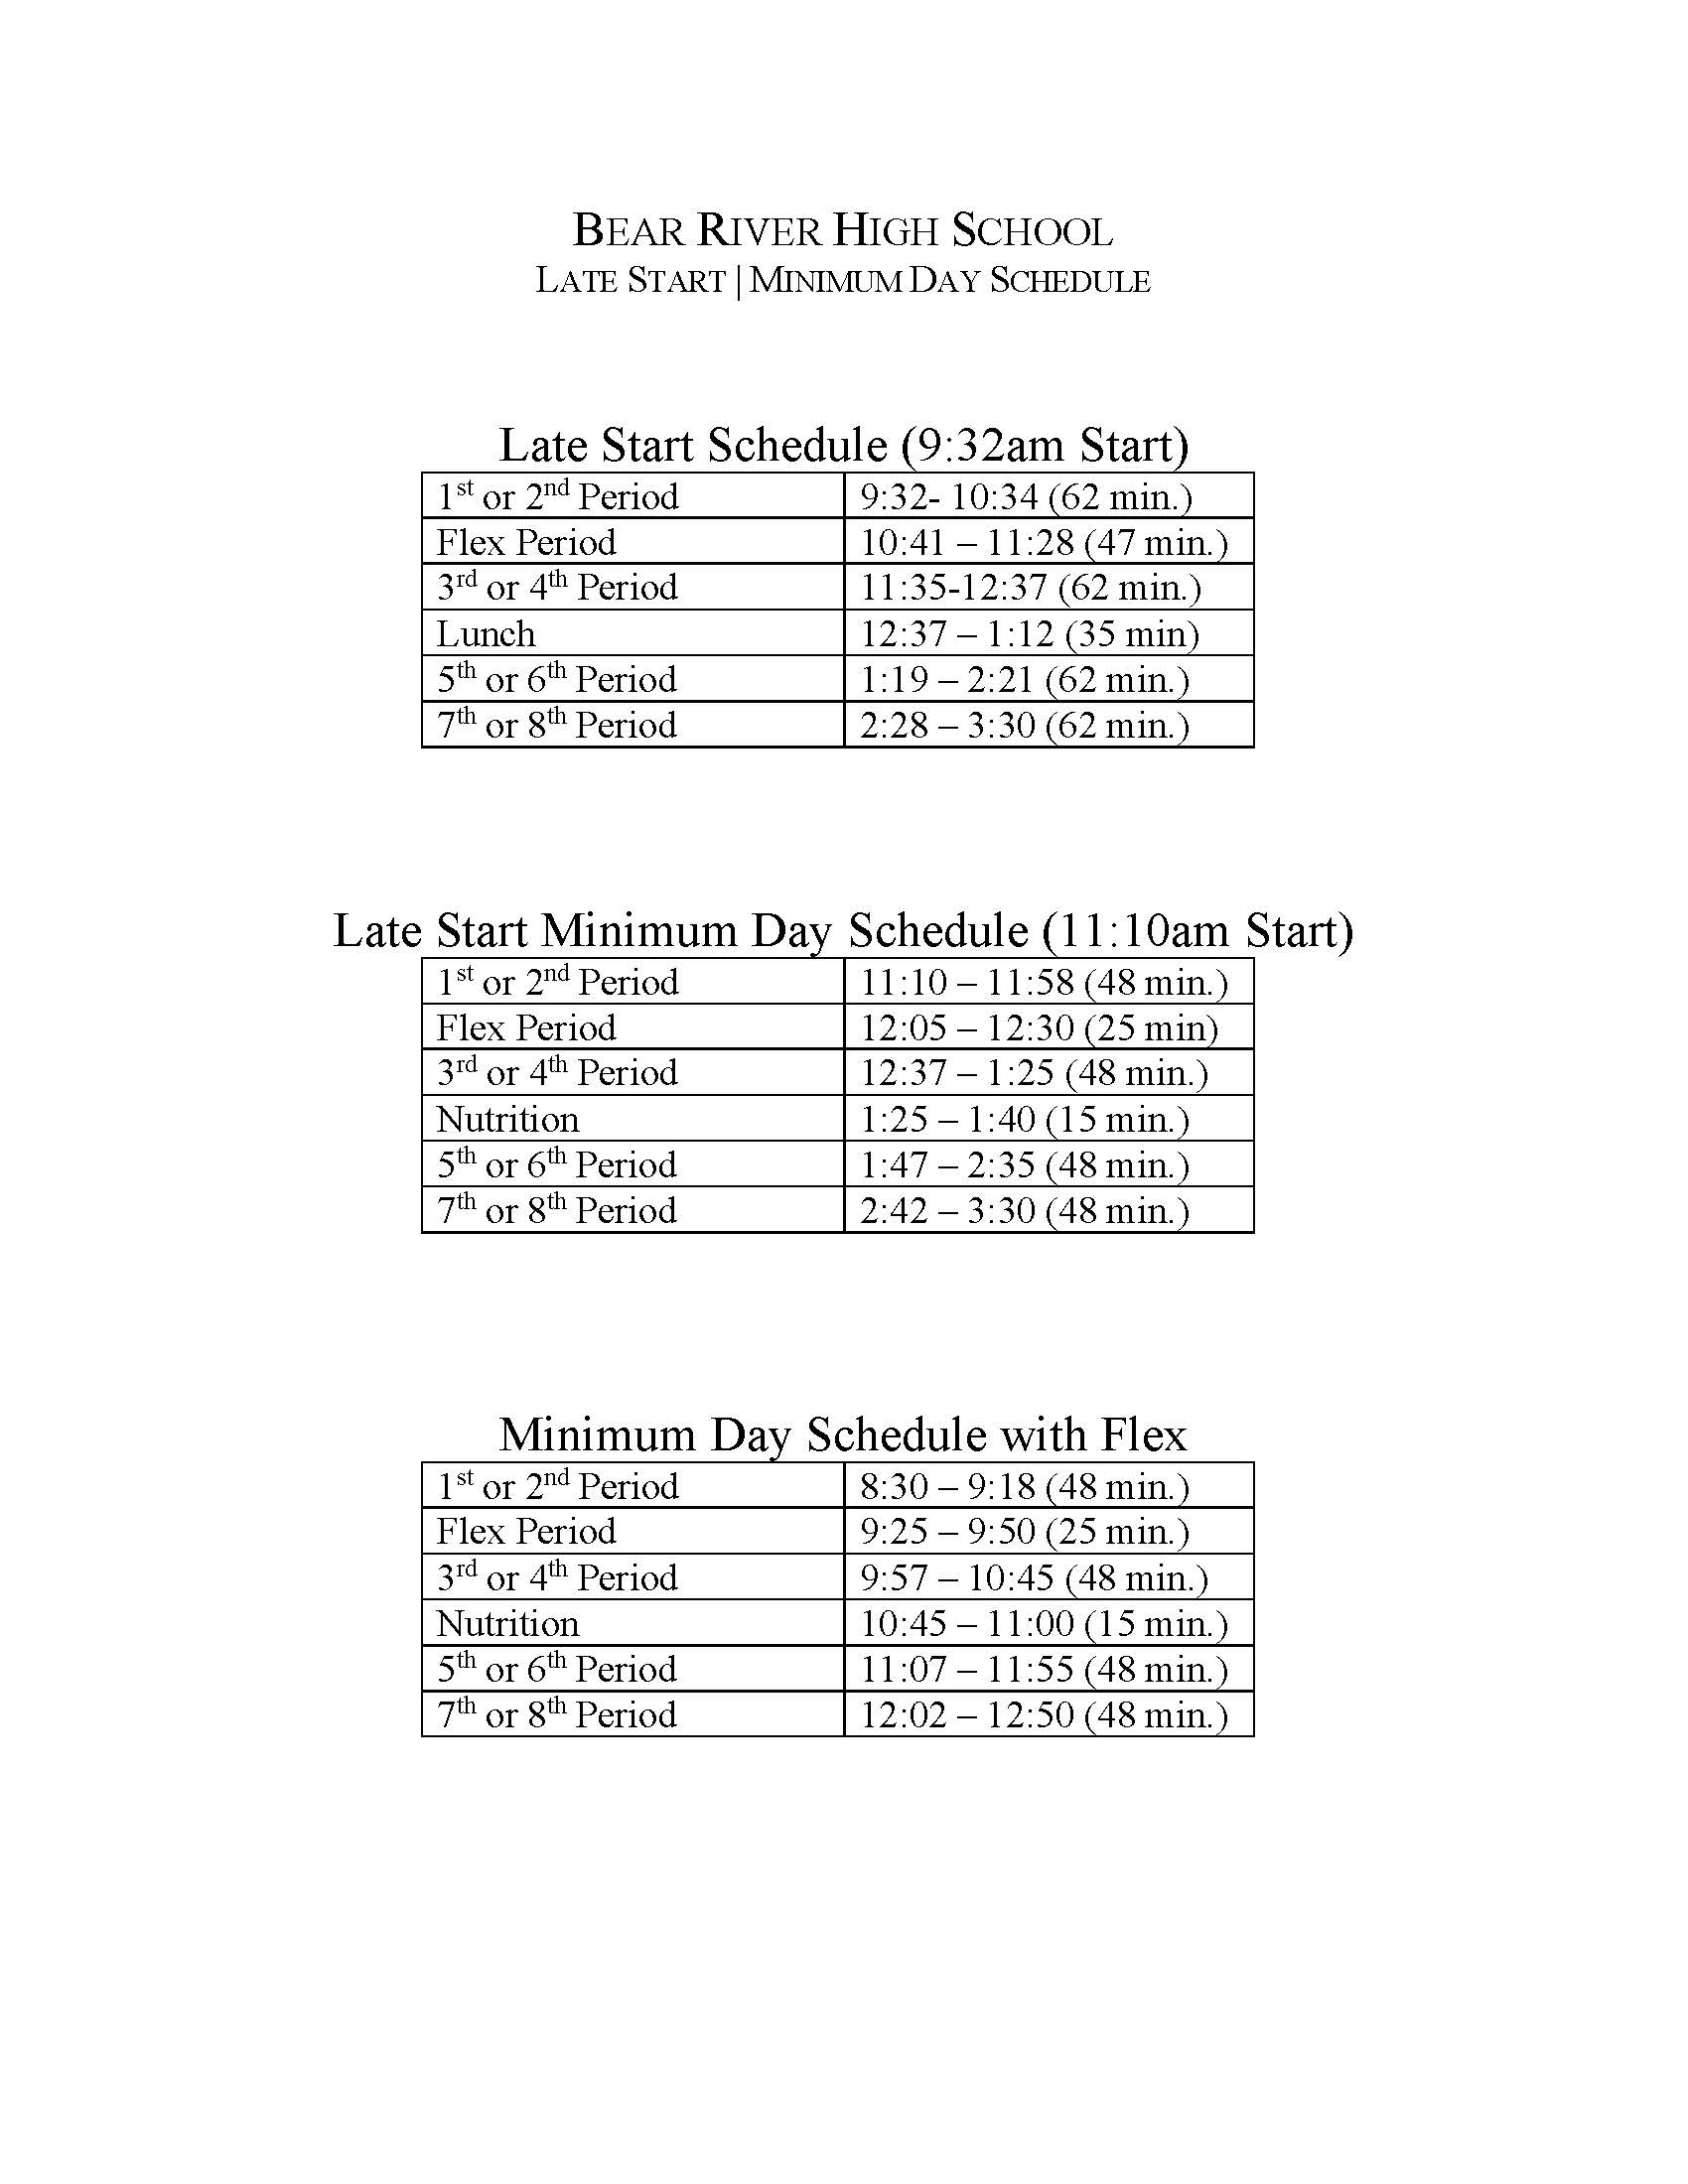 Late Start and Minimum Day Schedule